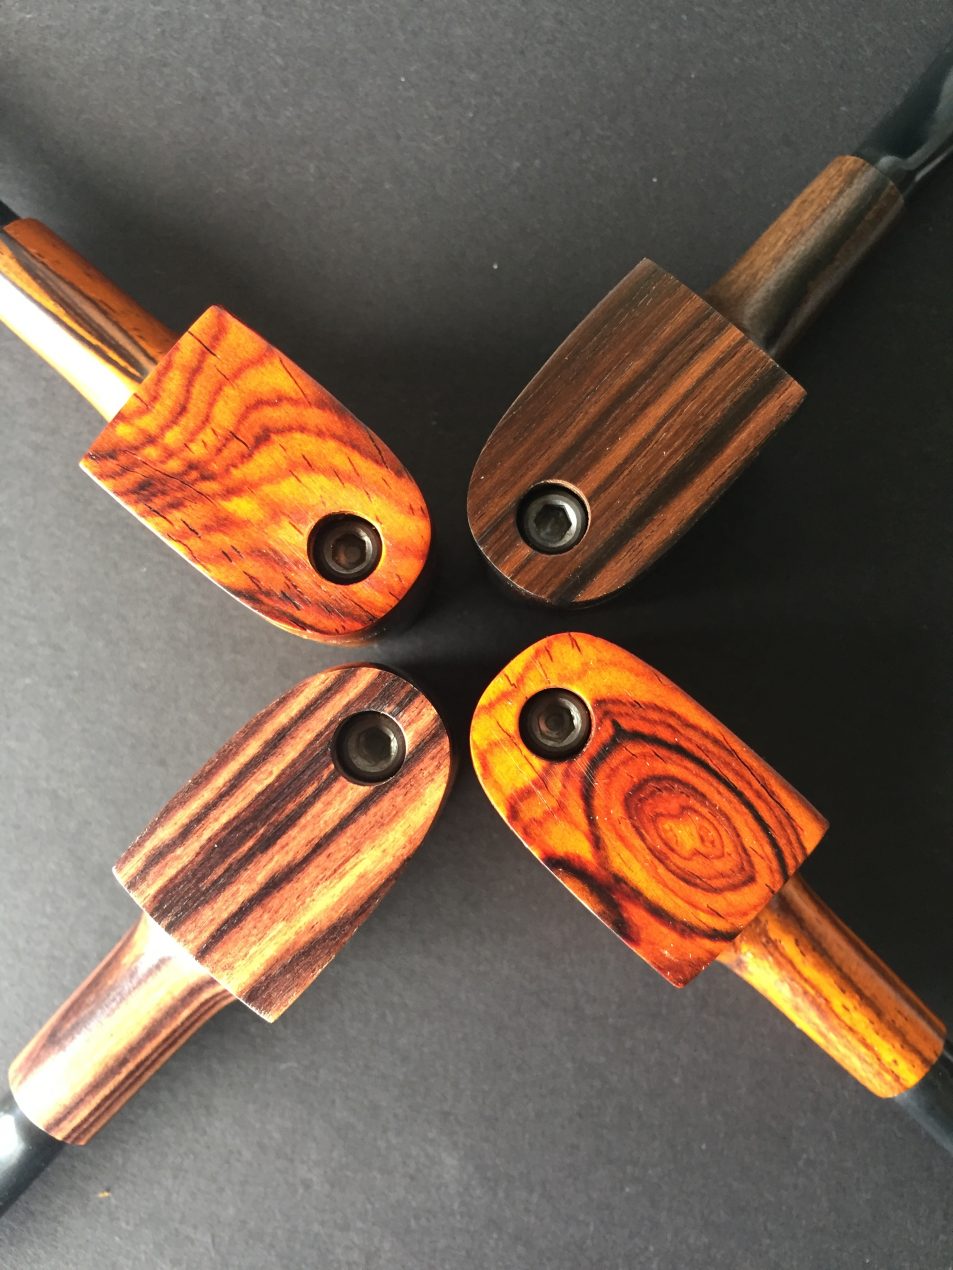 Custom Wood Cannabis Pipes - Made in USA - Made To Spec